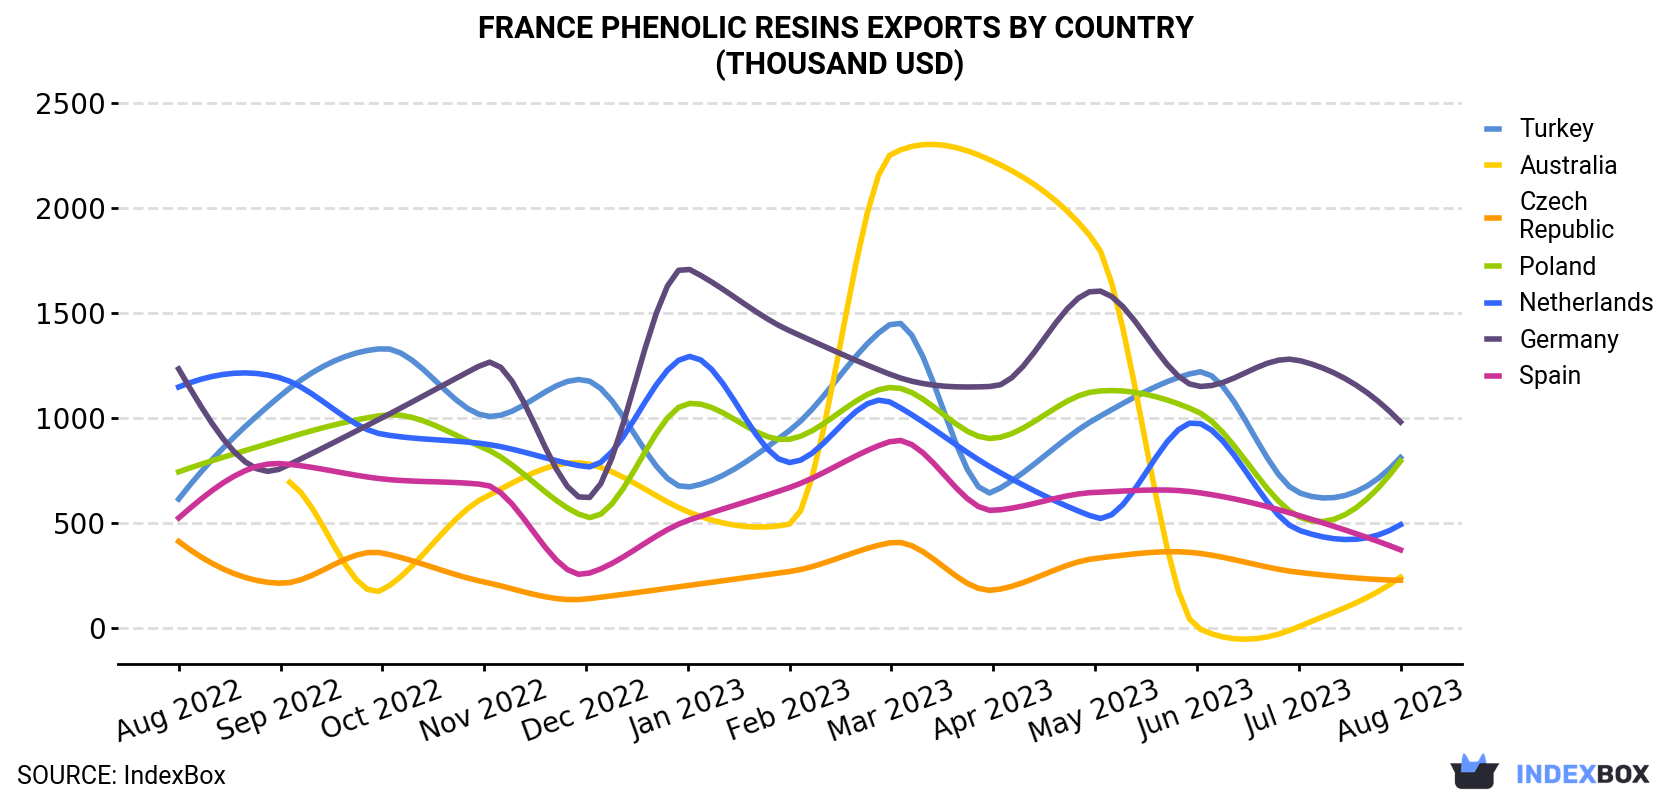 France Phenolic Resins Exports By Country (Thousand USD)